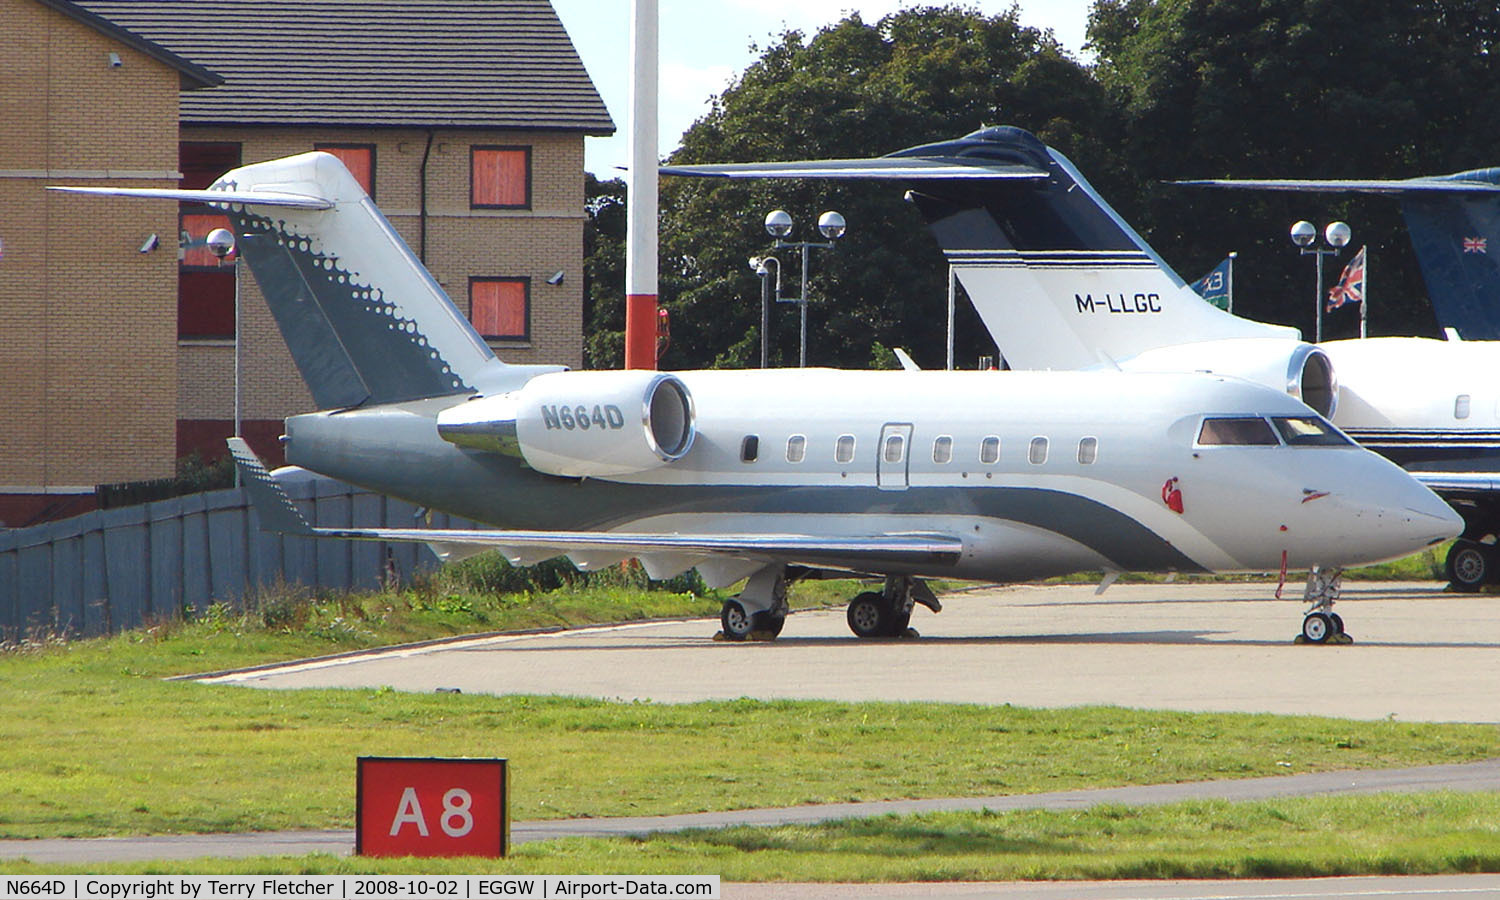 N664D, 2001 Bombardier Challenger 604 (CL-600-2B16) C/N 5505, Challenger - still in Ocean Sky livery - at Luton